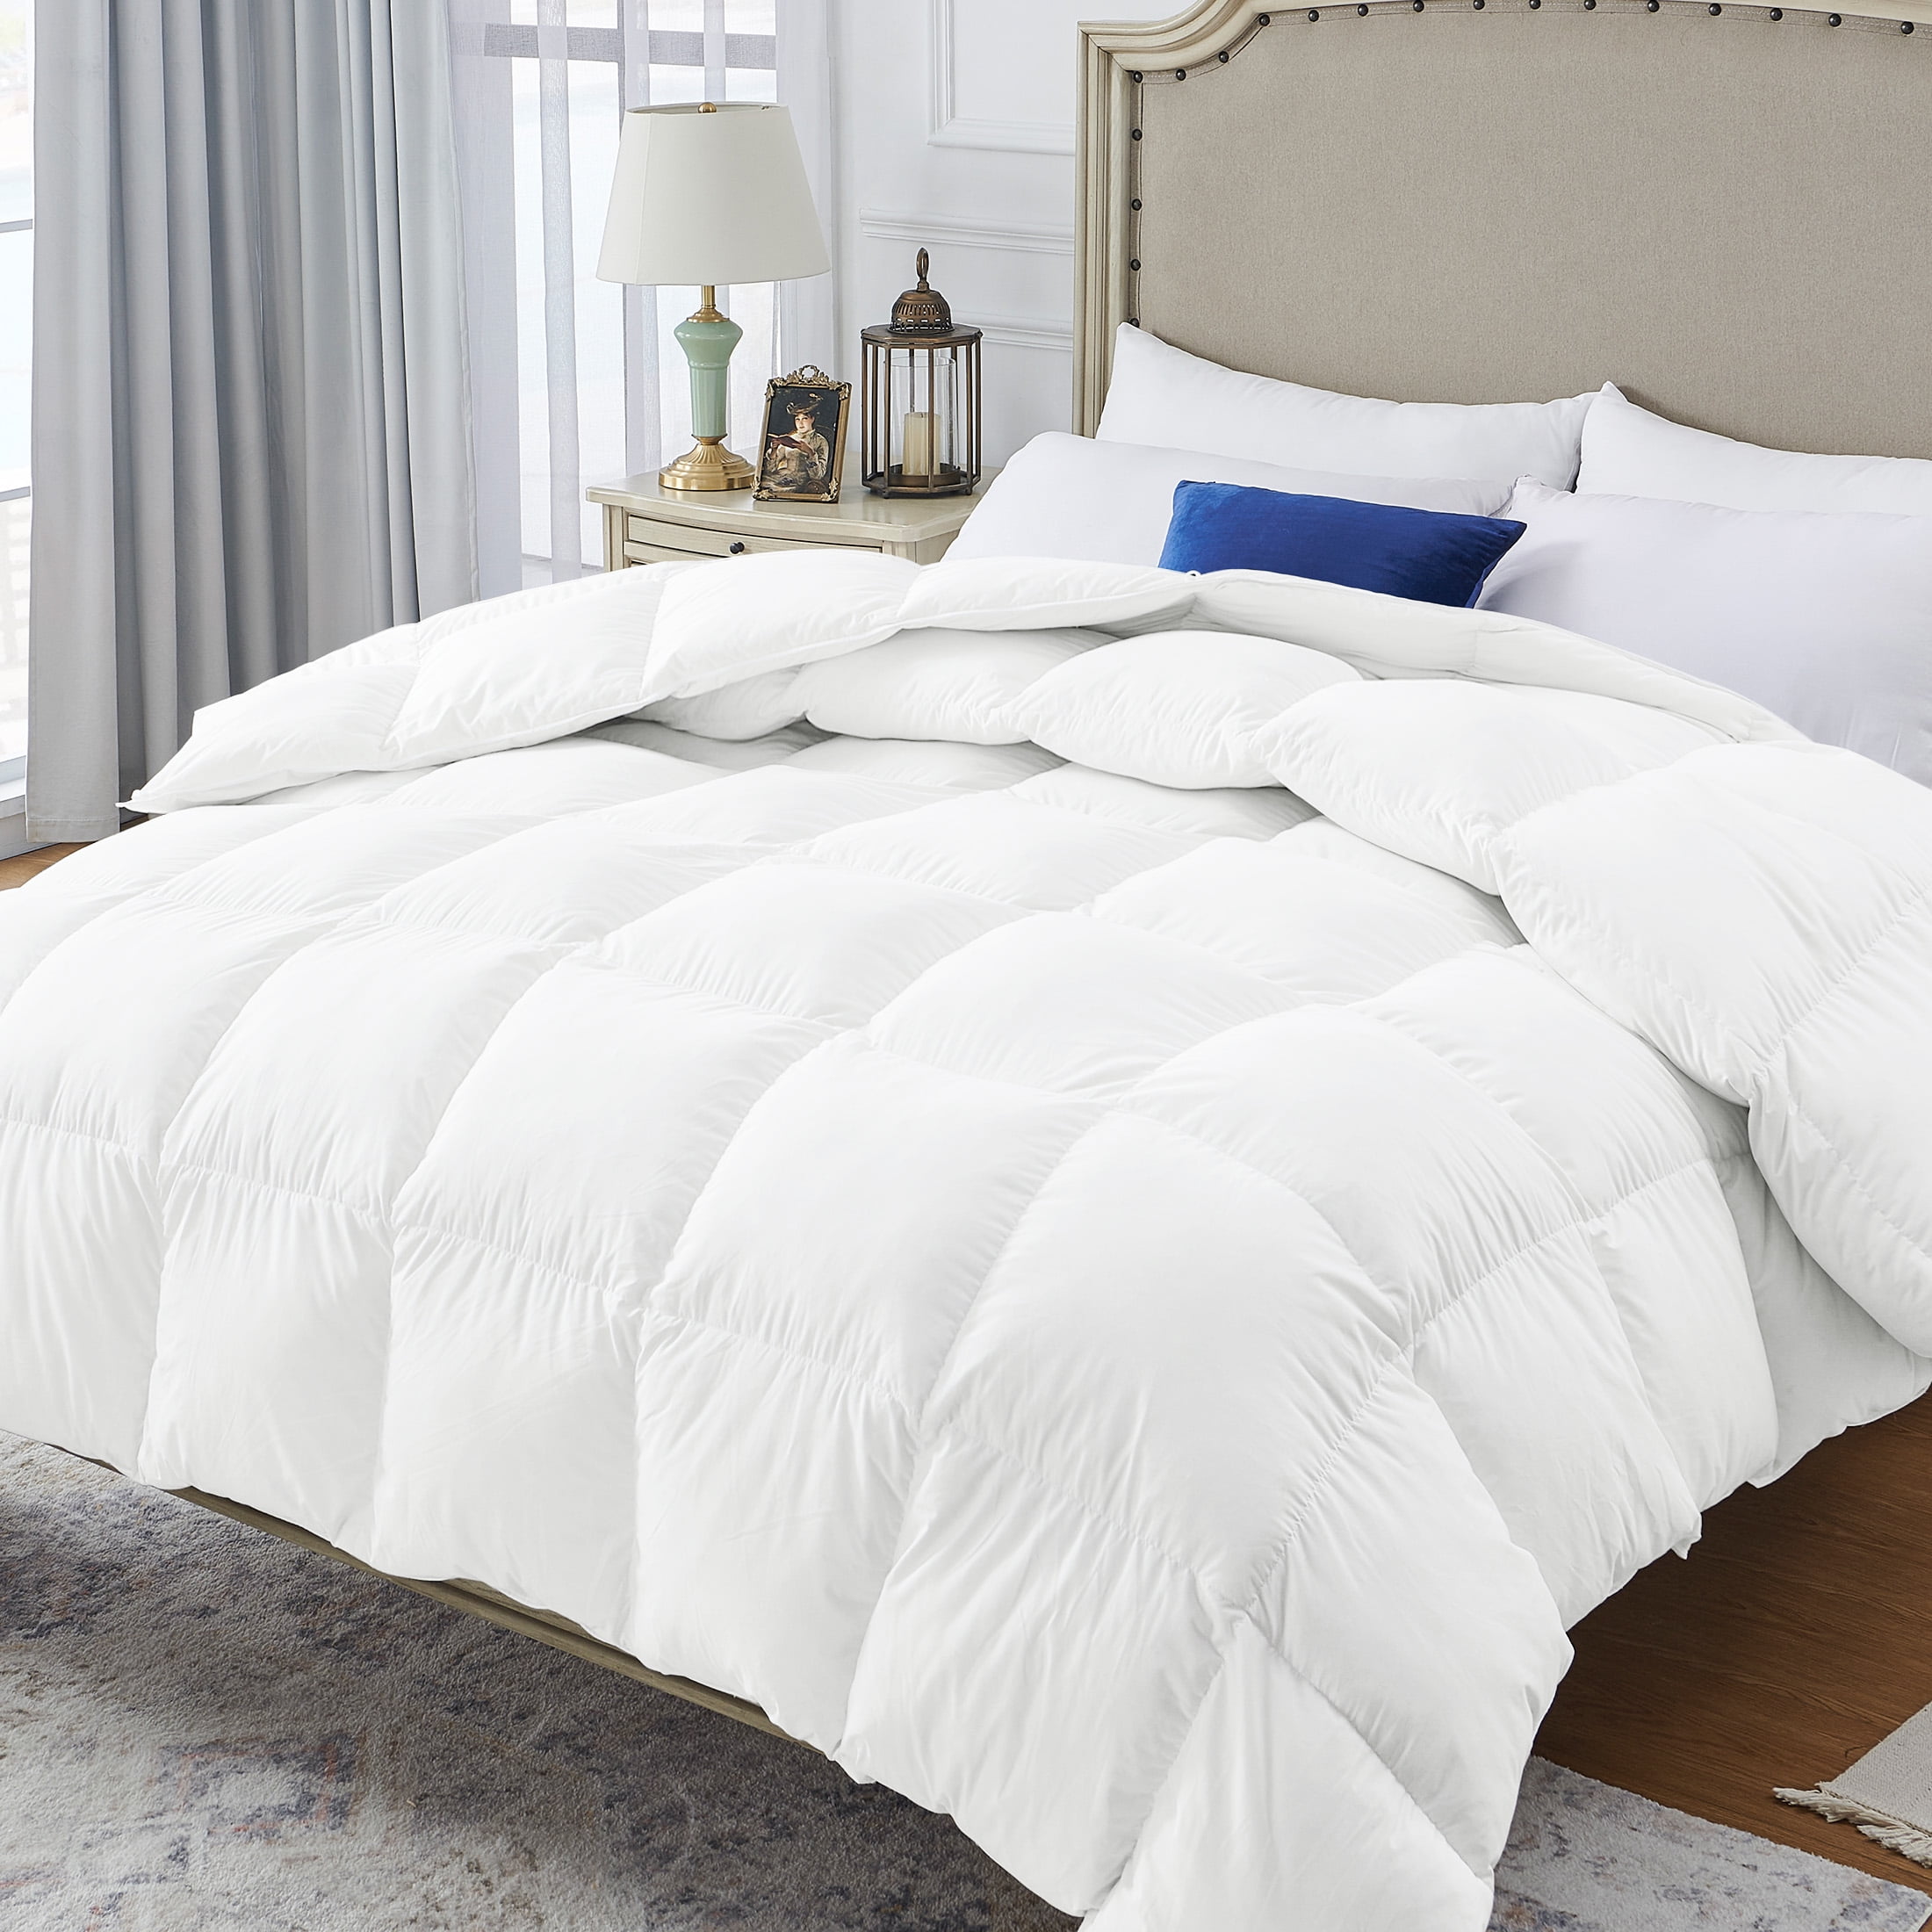 Teler Feather Down Comforter Queen Size - Duvet Insert with 100% Cotton Cover - White 90 x 90 Inch - Walmart.com